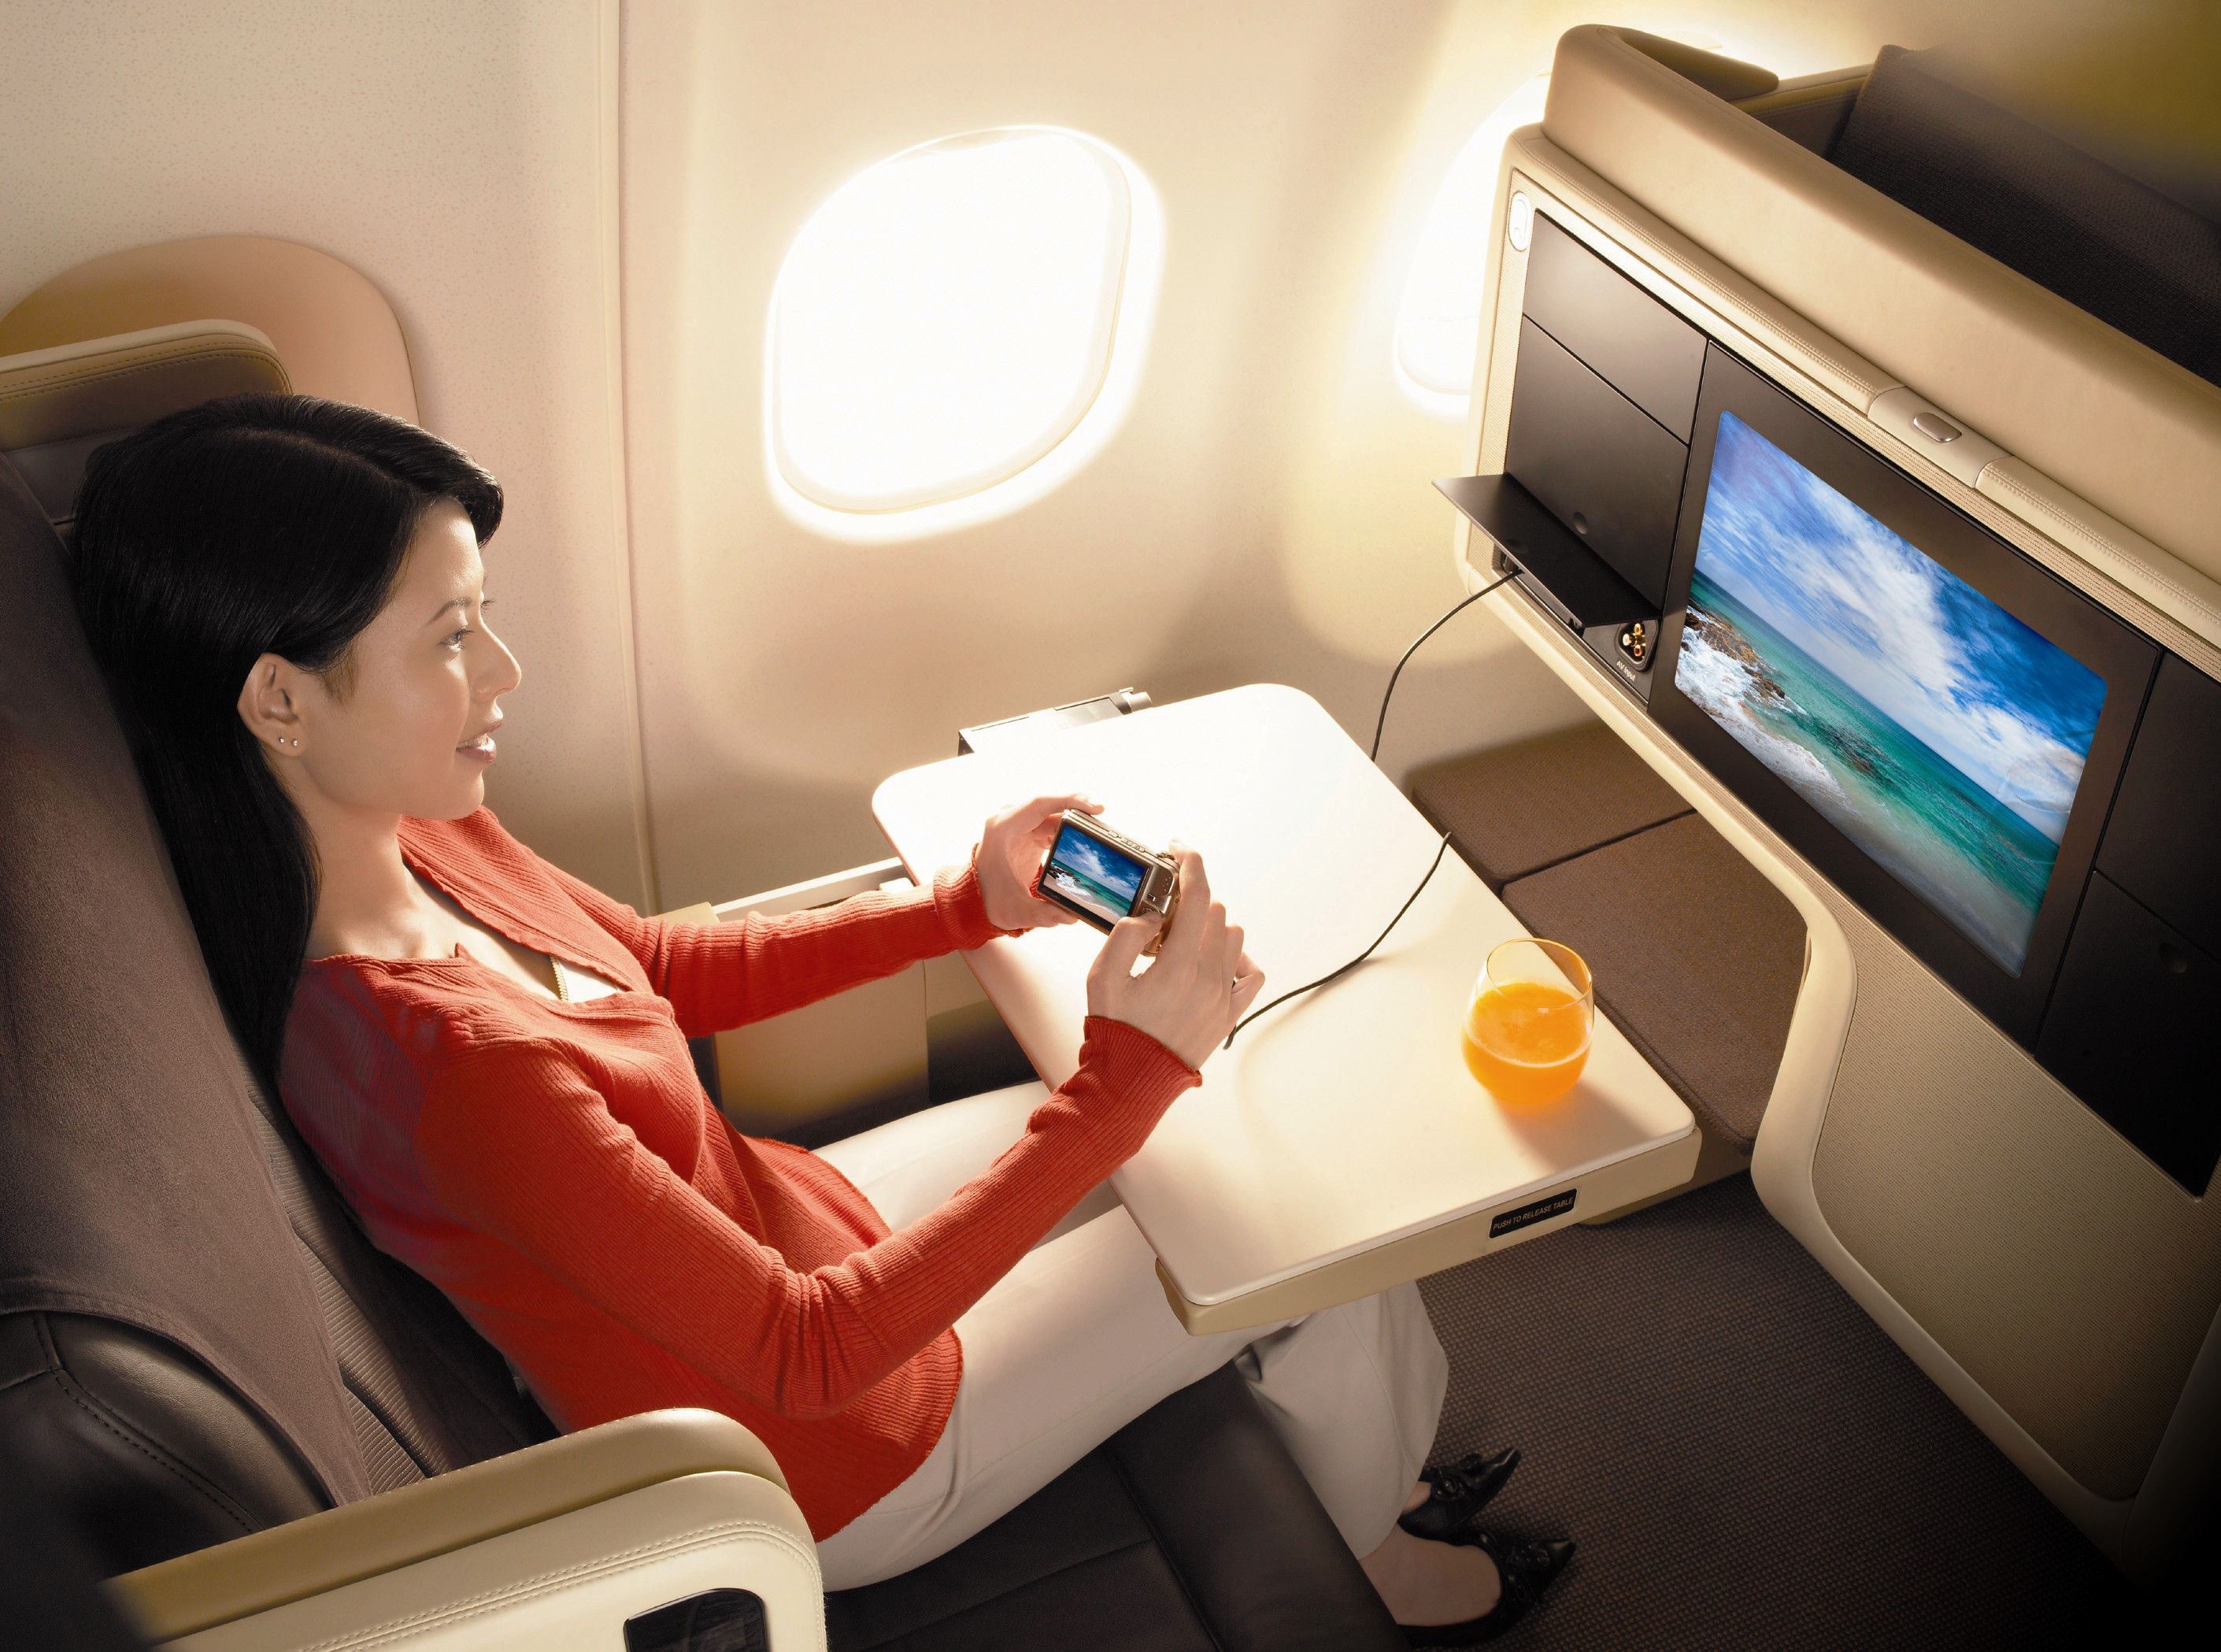 Image Credit: Singapore Airlines